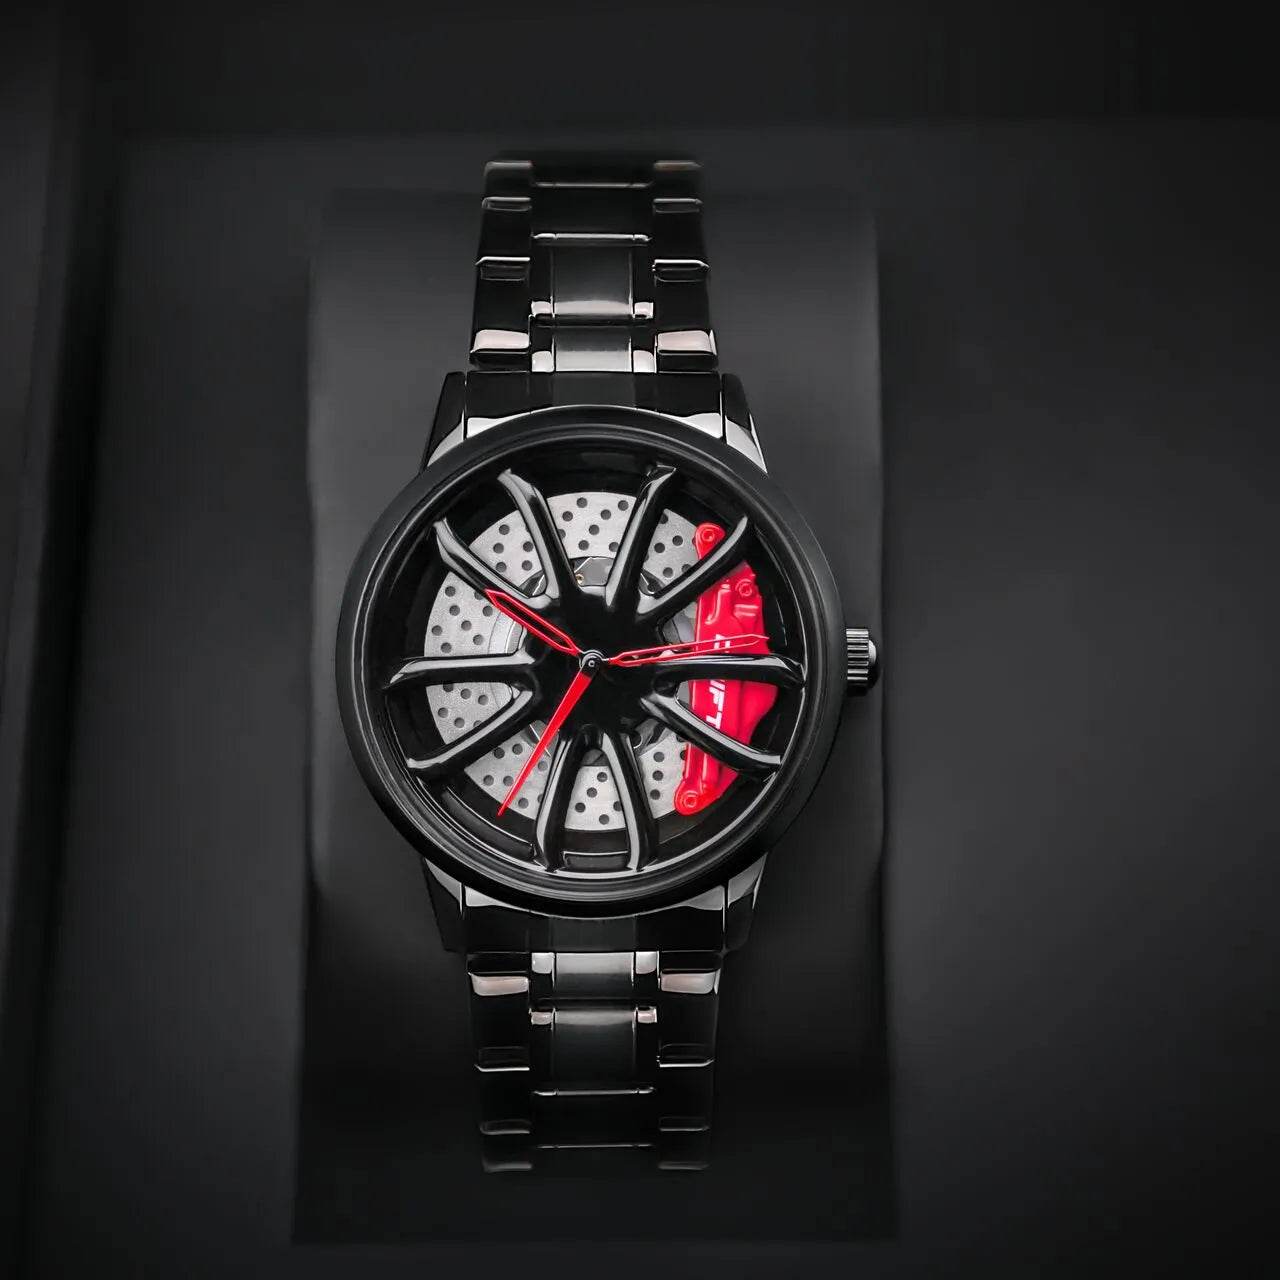 Illuminate your automotive enthusiasm with our striking red Performance GT Rim Watch! Crafted by a German startup, these precision watches are geared to captivate motorsport, tuning, and auto aficionados. Prepare to ignite your passion in style! #id_46744365400394